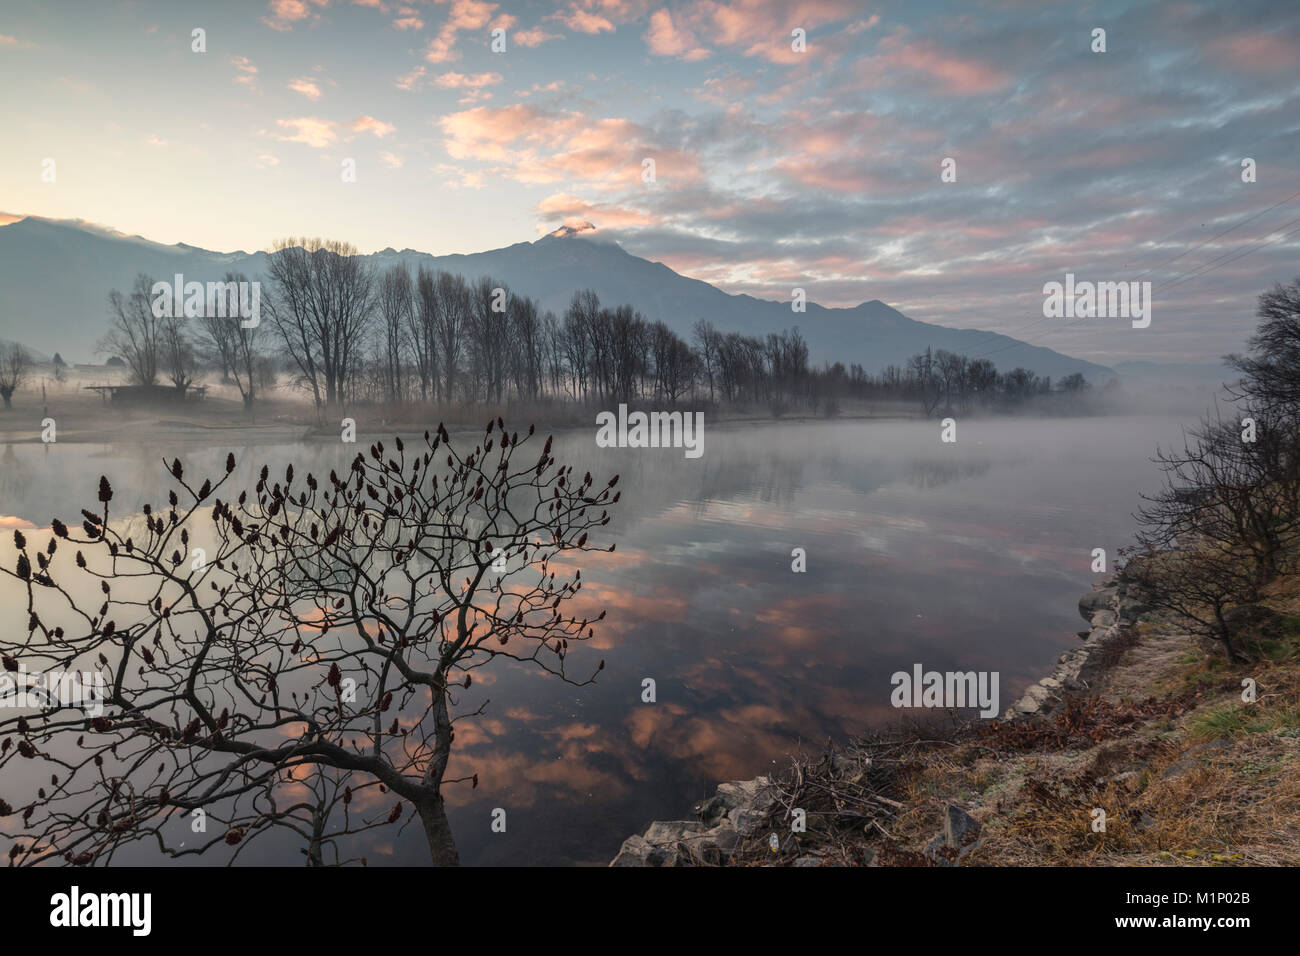 Clouds reflected in River Mera at dawn, Sorico, Como province, Lower Valtellina, Lombardy, Italy, Europe Stock Photo